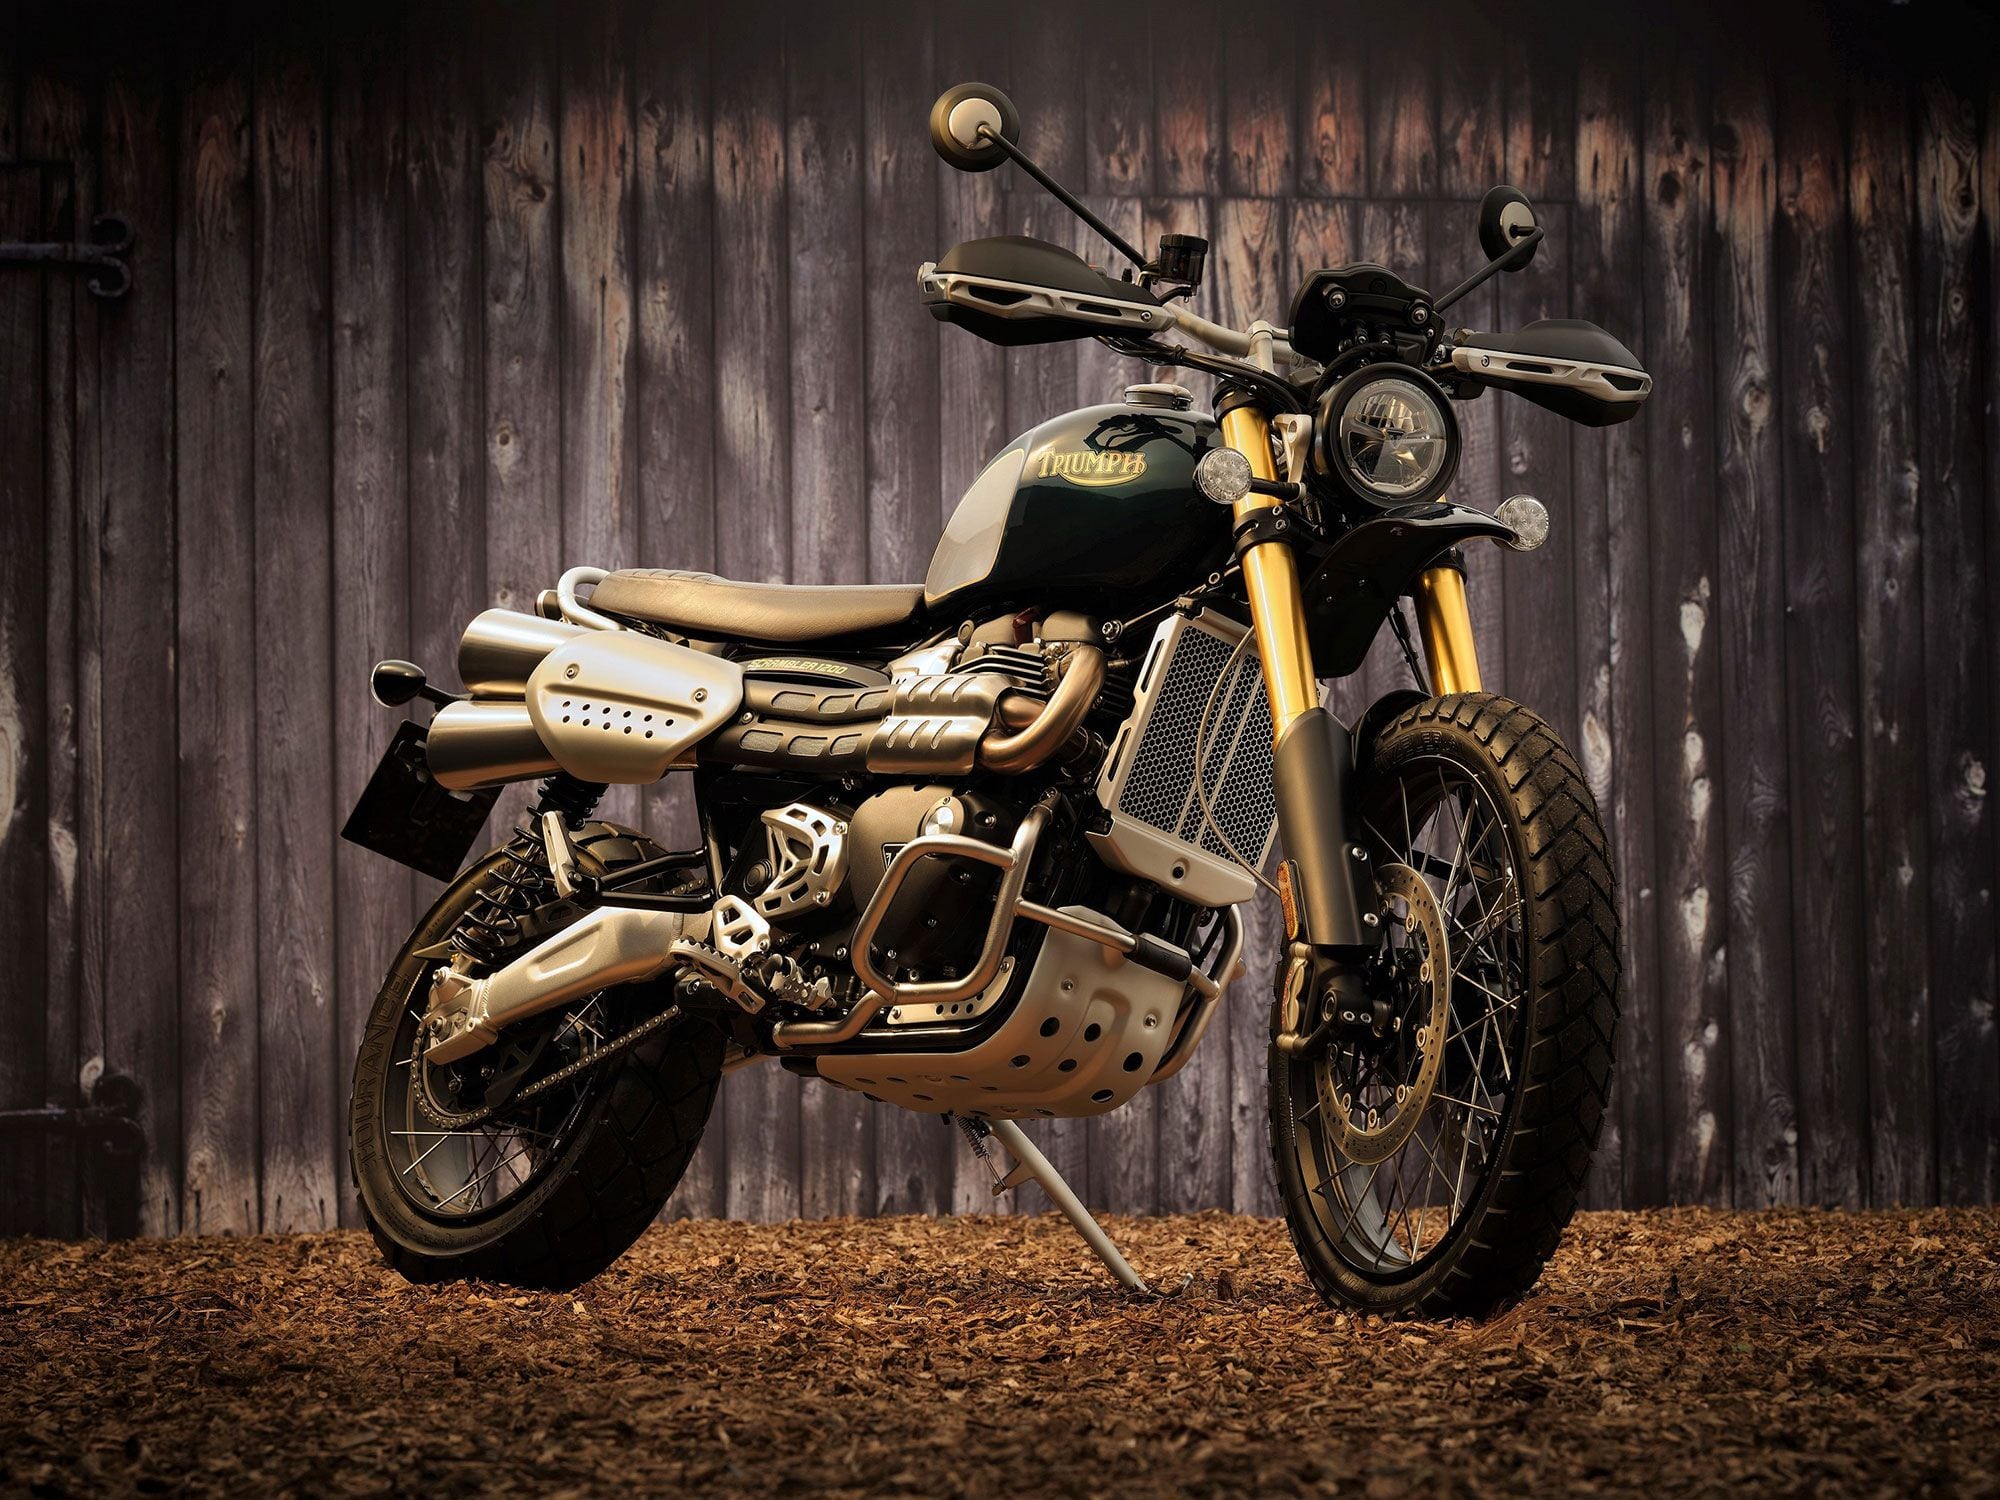 Triumph has mildly updated the Scrambler 1200 series for 2022, which now offers three models, including this Steve McQueen Limited Edition.